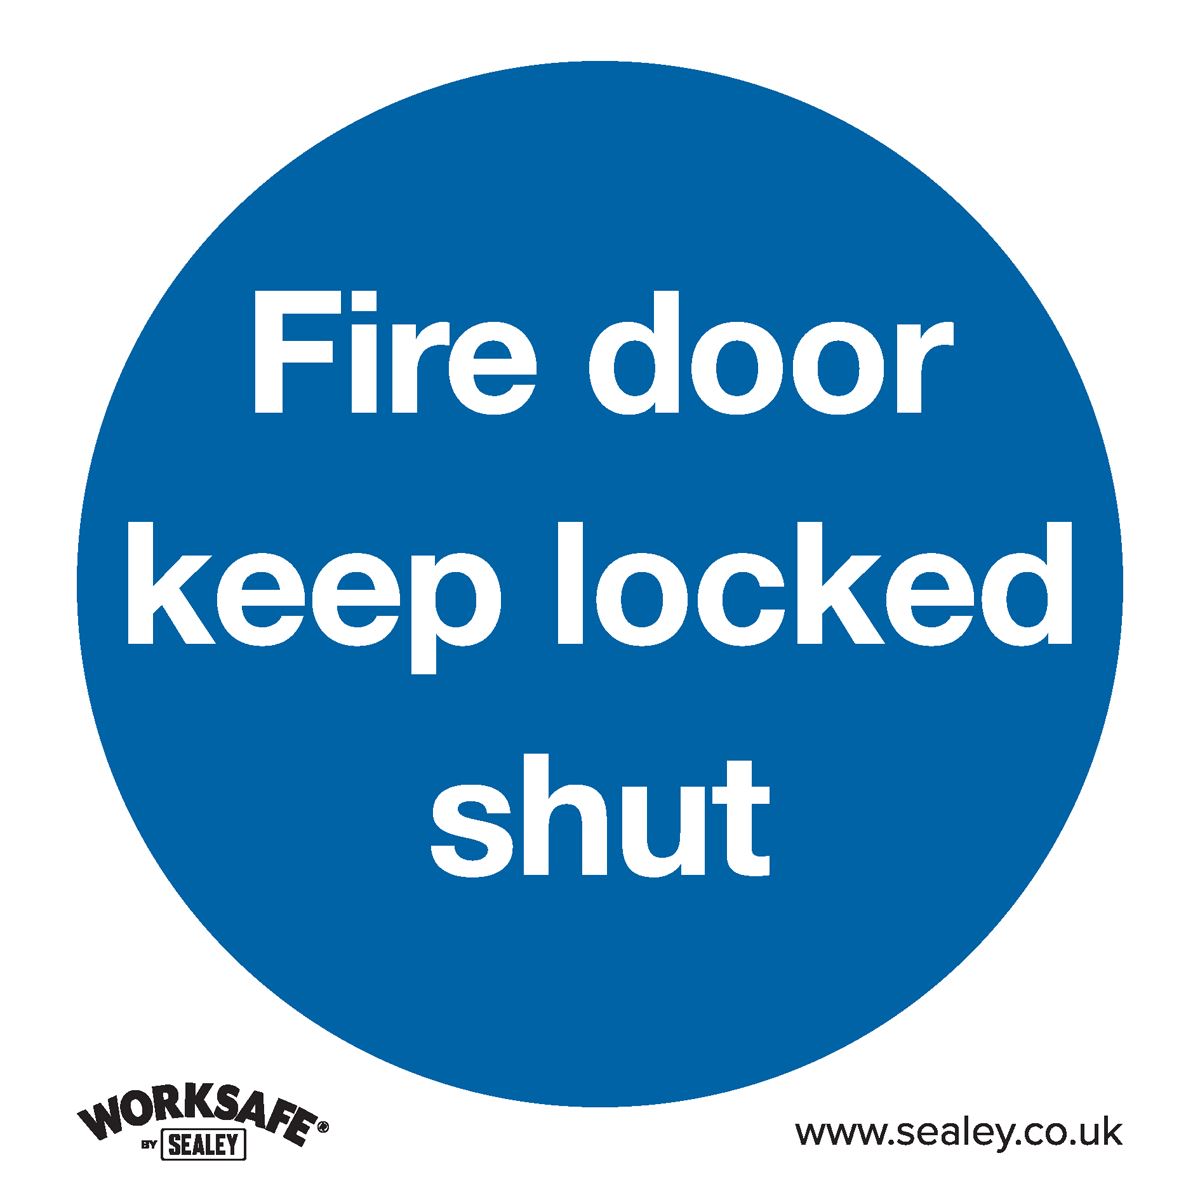 Worksafe by Sealey Mandatory Safety Sign - Fire Door Keep Locked Shut - Rigid Plastic - Pack of 10